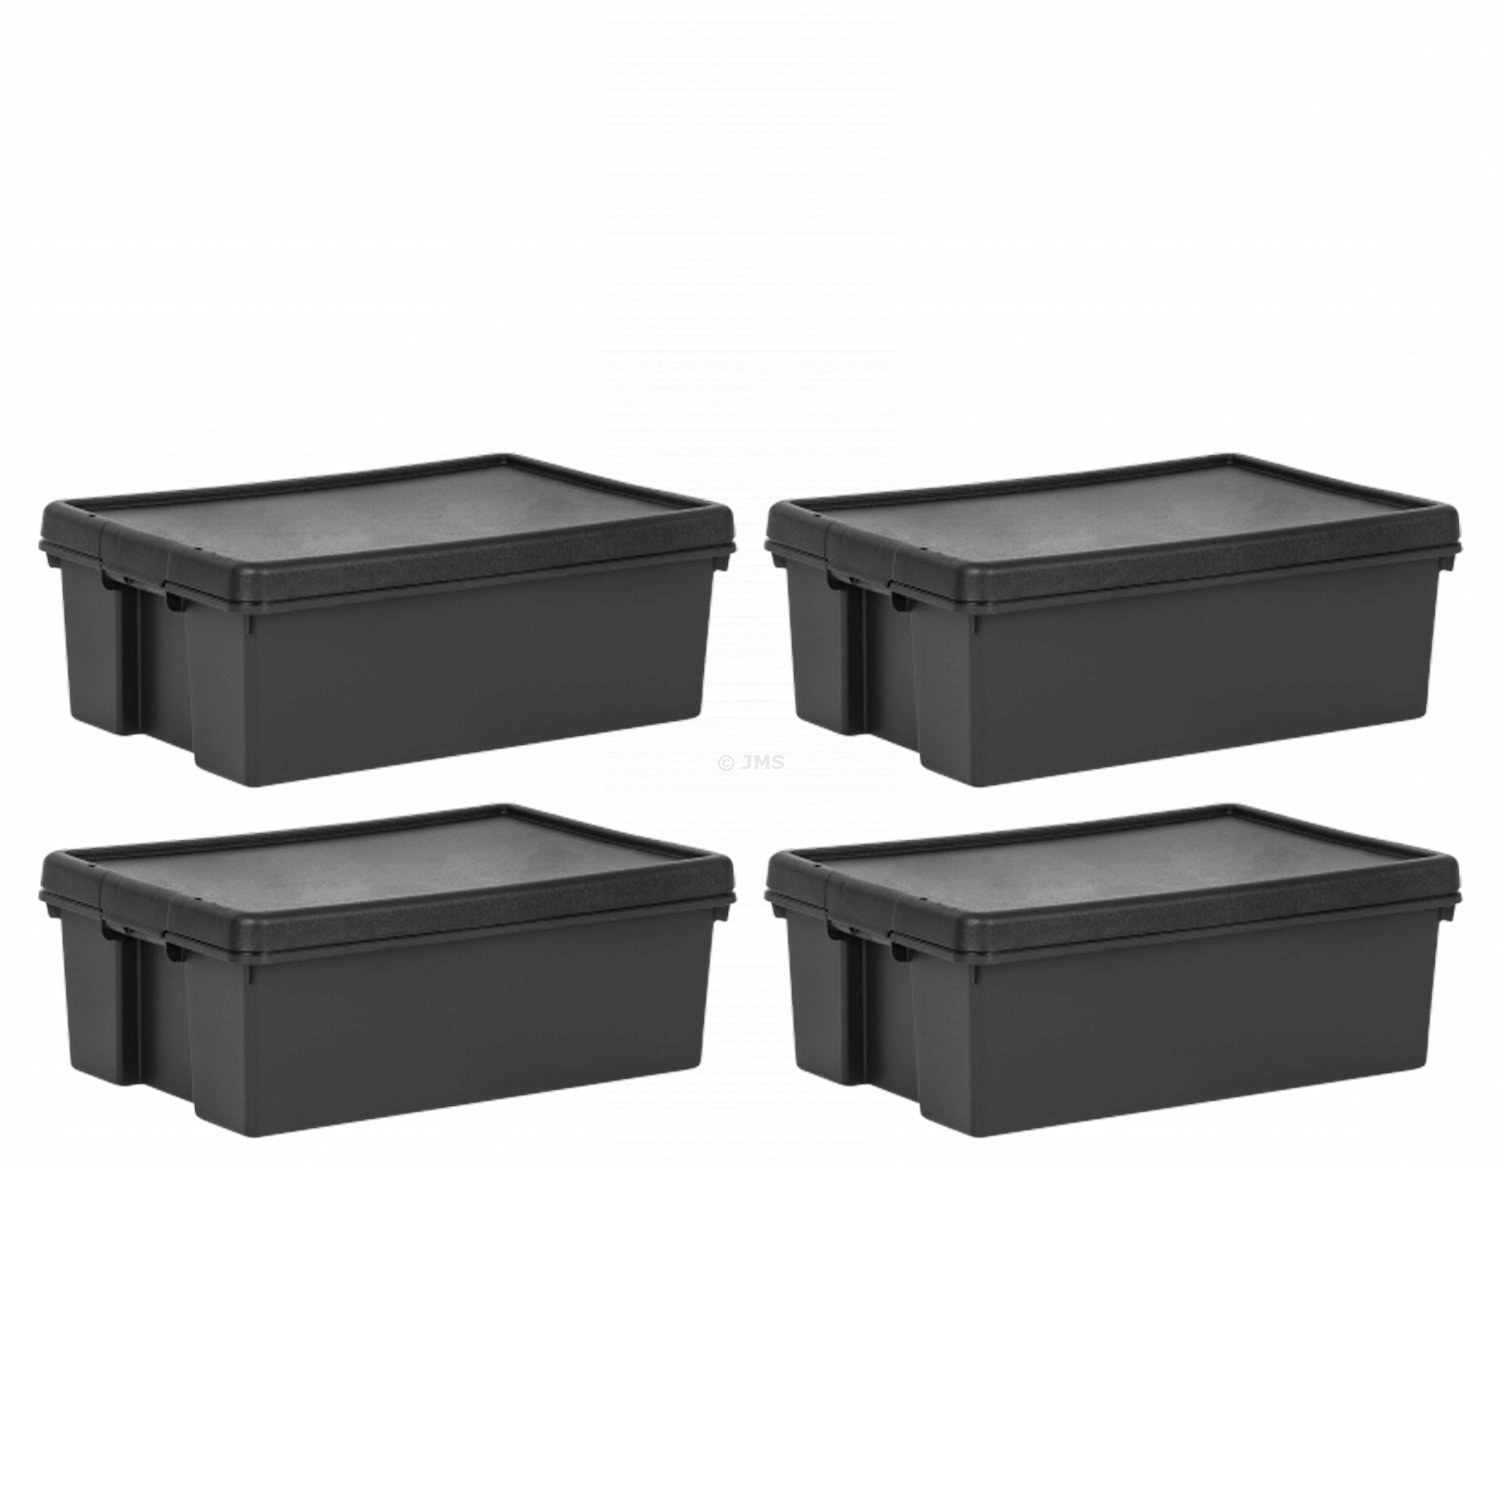 [Set of 4] Heavy Duty 36L Black Storage Box with Lid Recycled Plastic Stackable Nestable Containers Home Office Garage